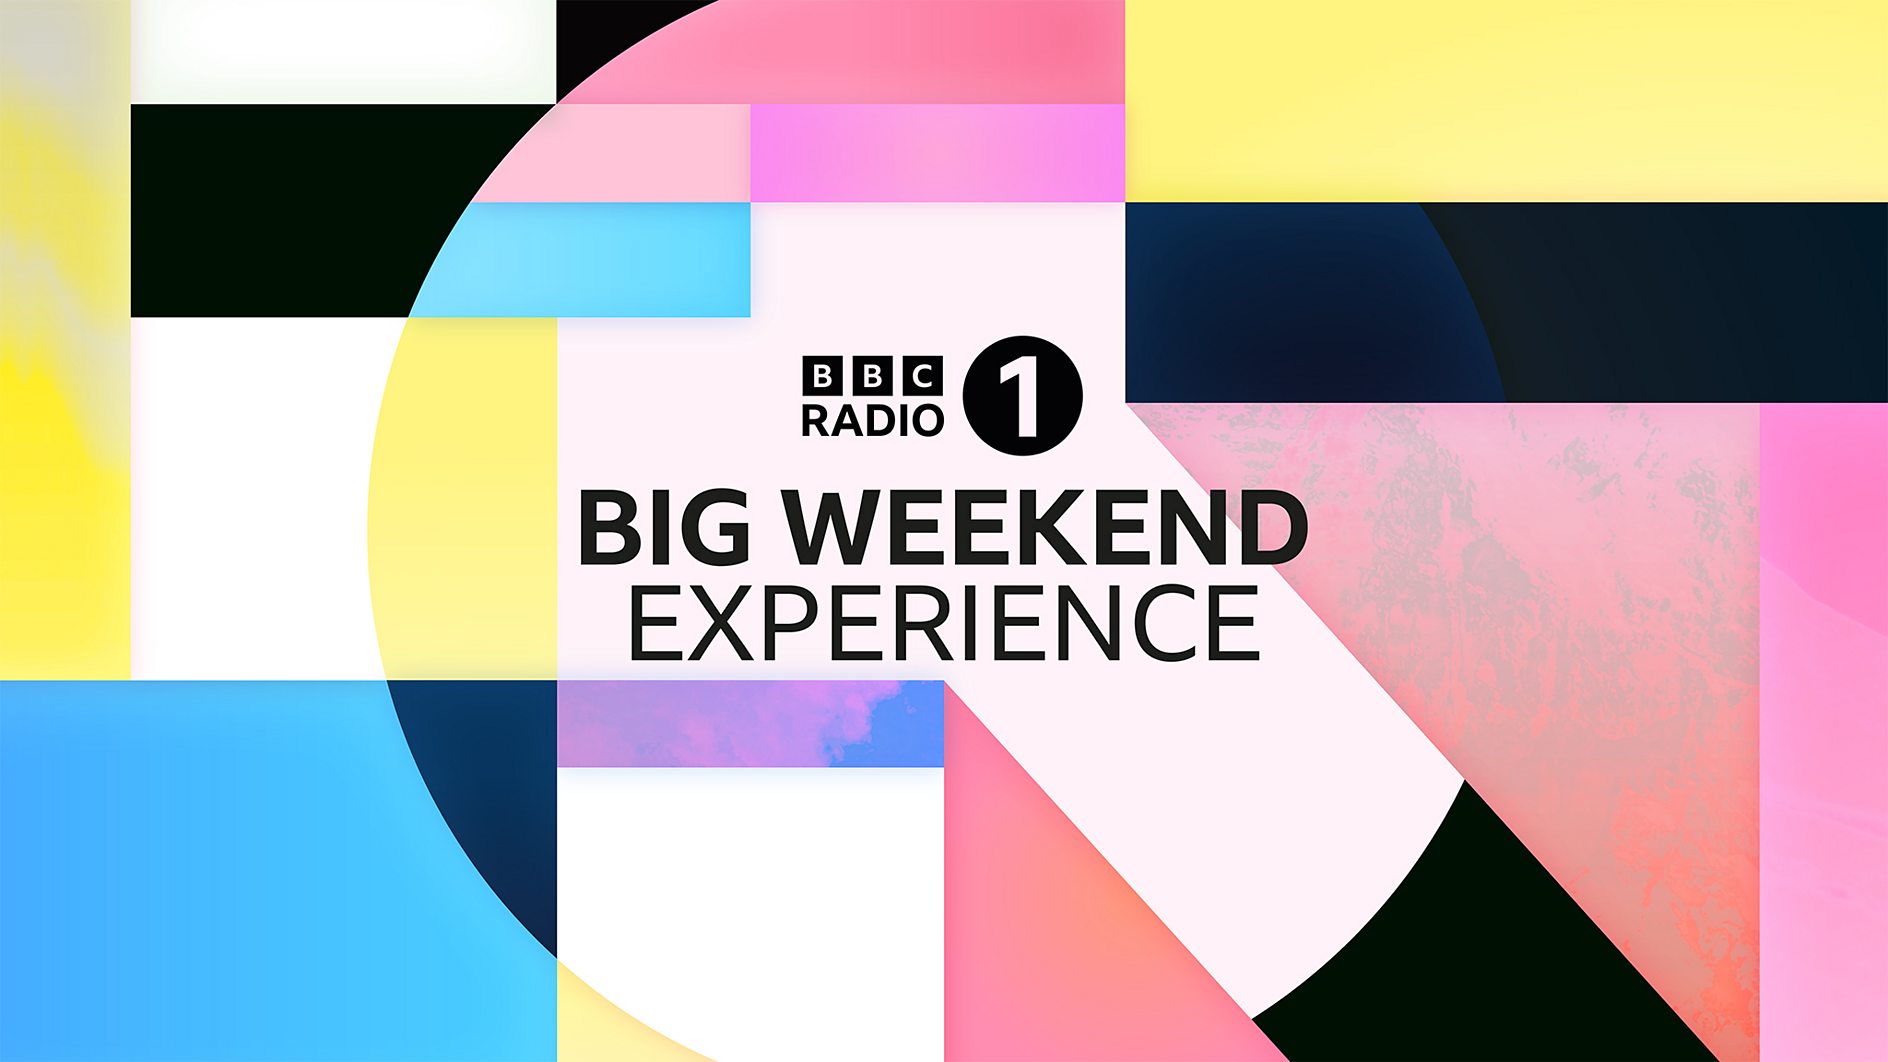 BBC Radio 1 launch first-ever Big Weekend exhibition in partnership with V&A Dundee